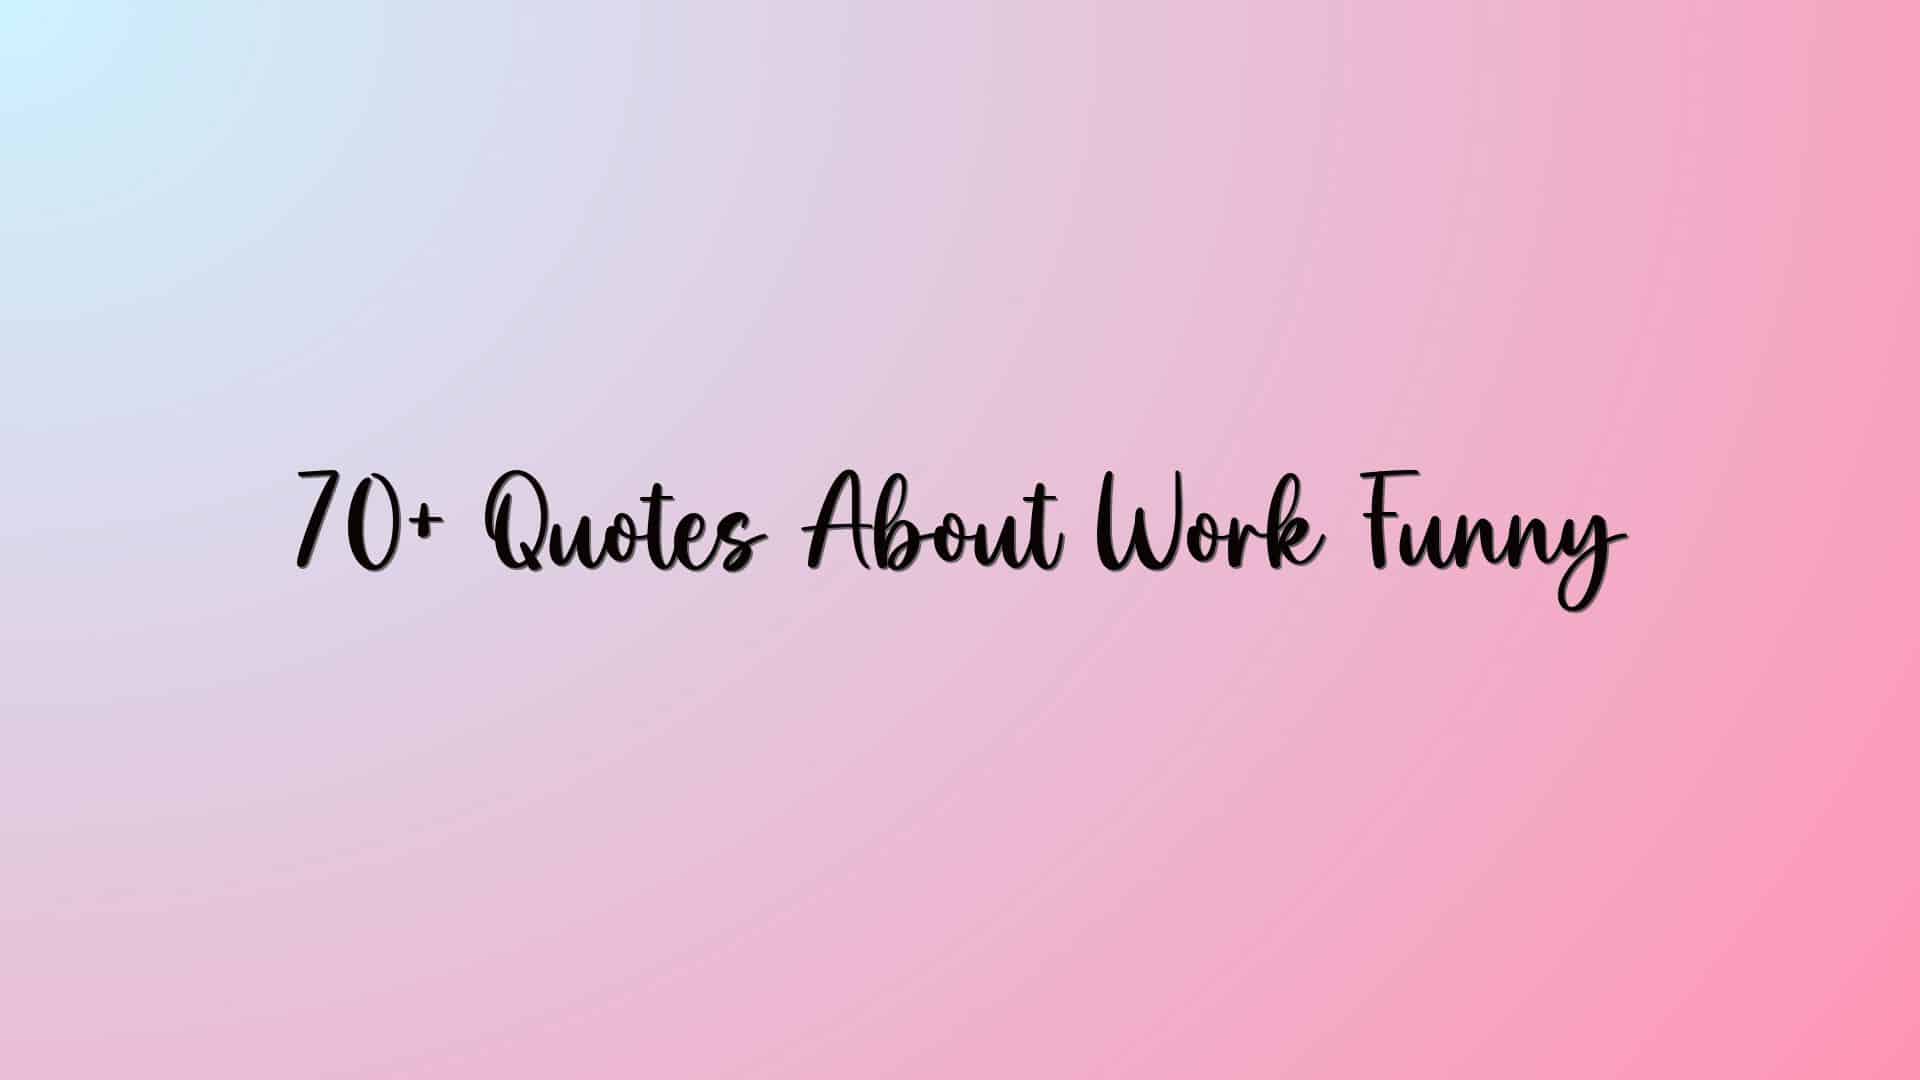 70+ Quotes About Work Funny